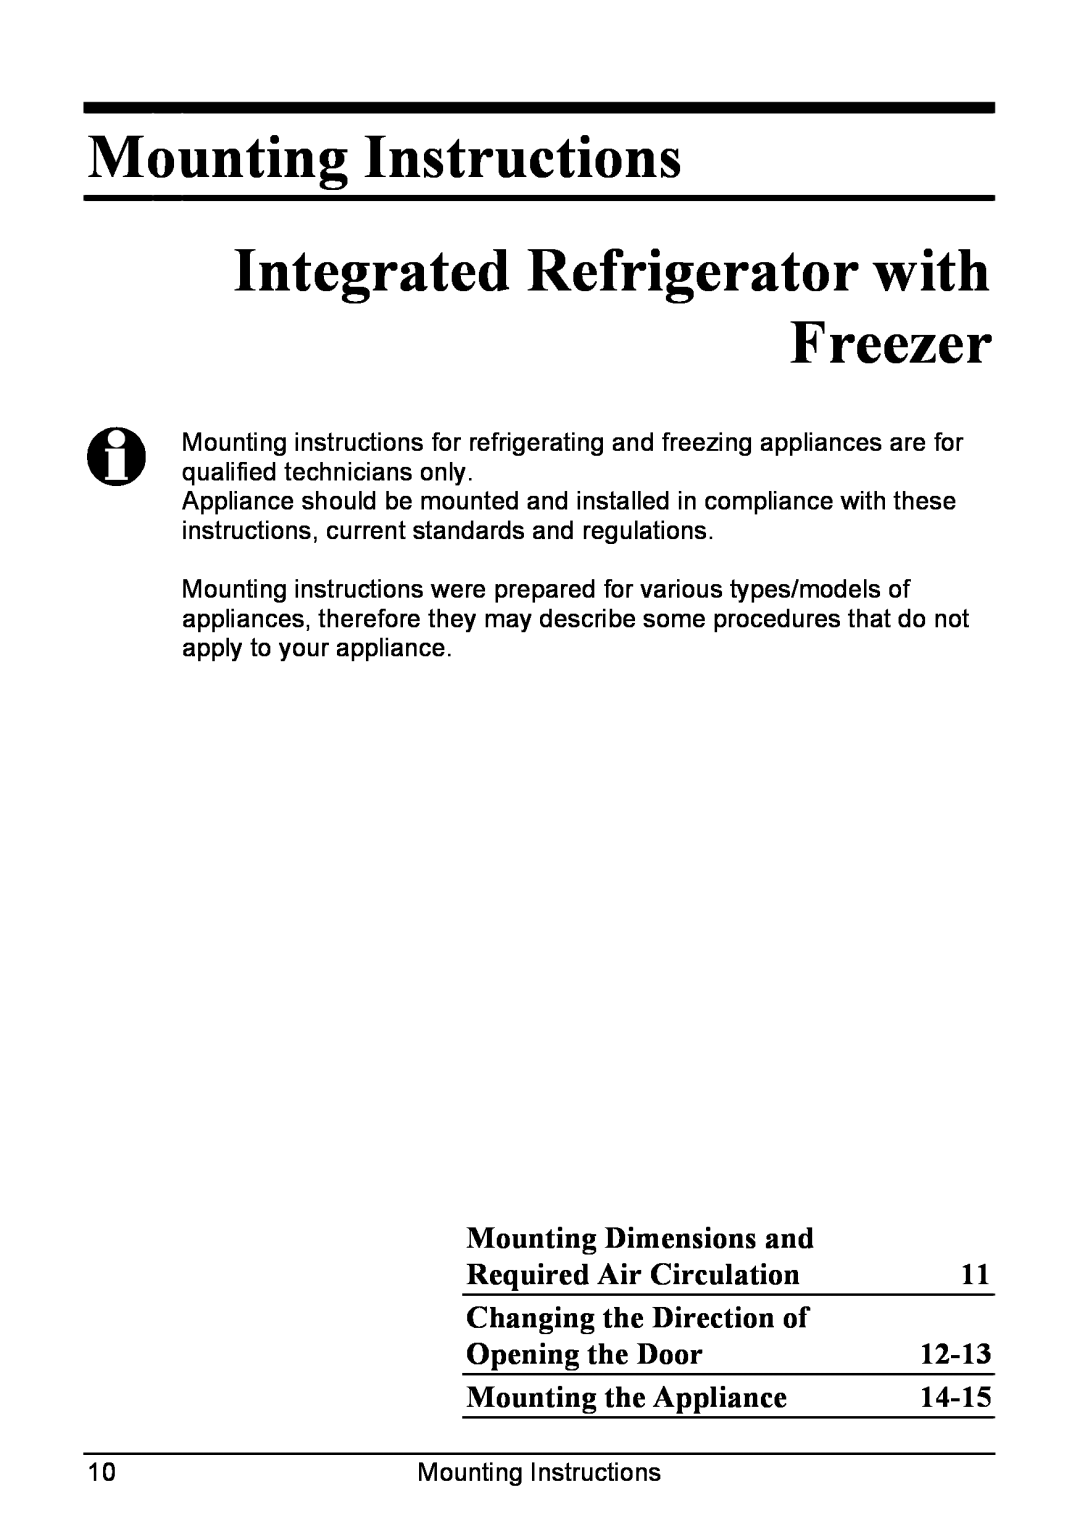 Smeg CR321A Mounting Instructions Integrated Refrigerator with Freezer, Mounting Dimensions and, Required Air Circulation 